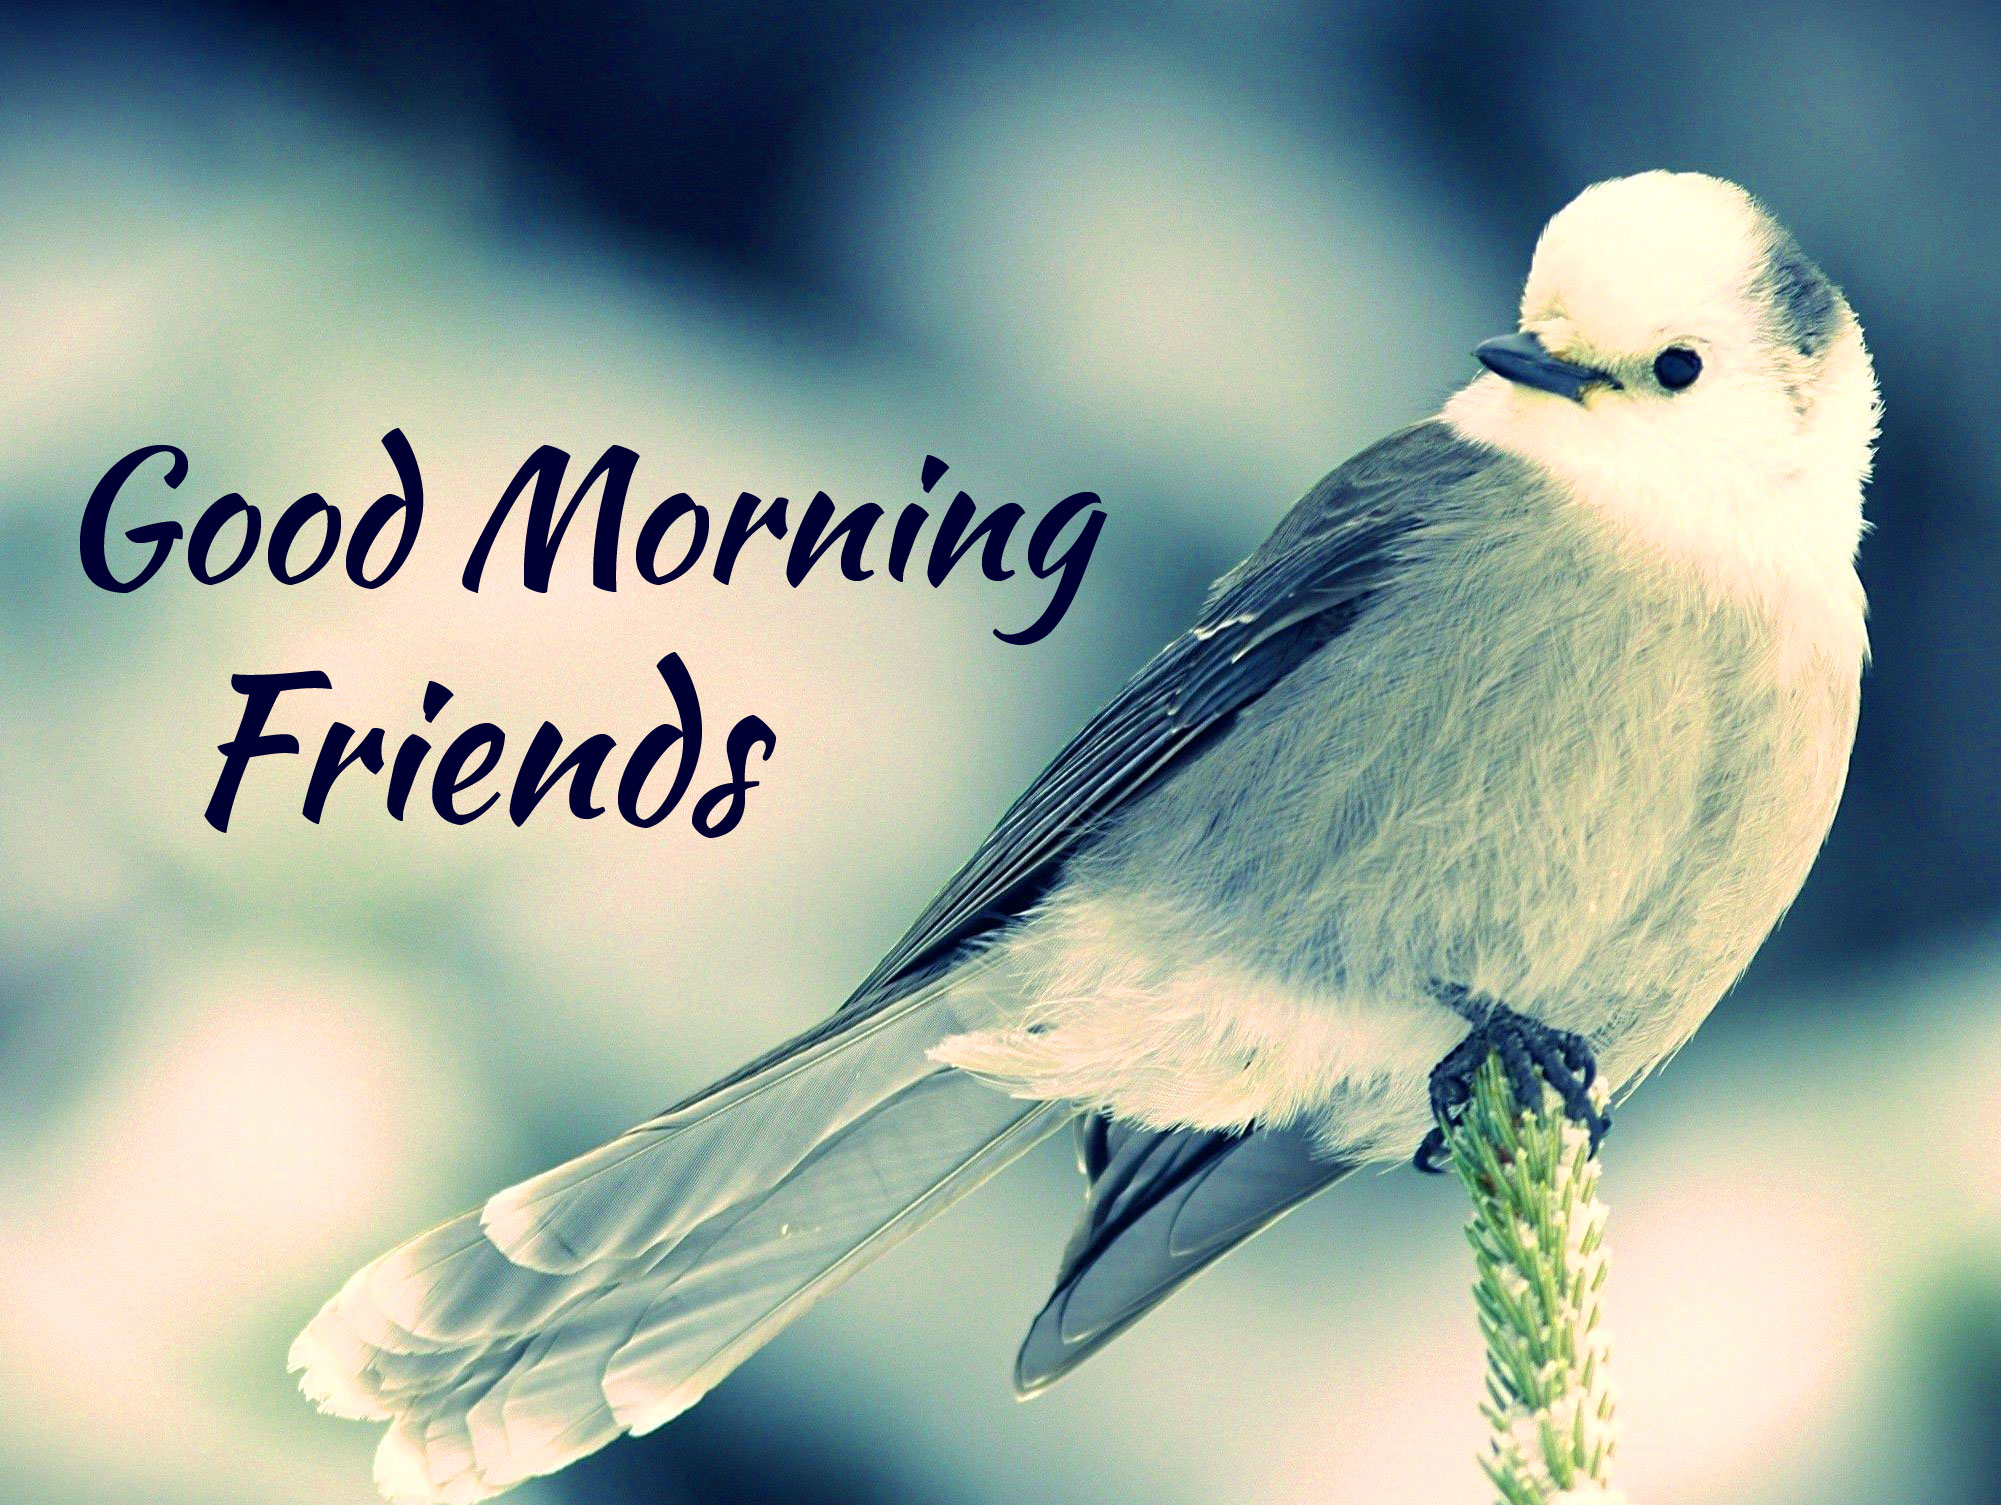 Good Morning Friends Images Pics Wallpaper free Download 